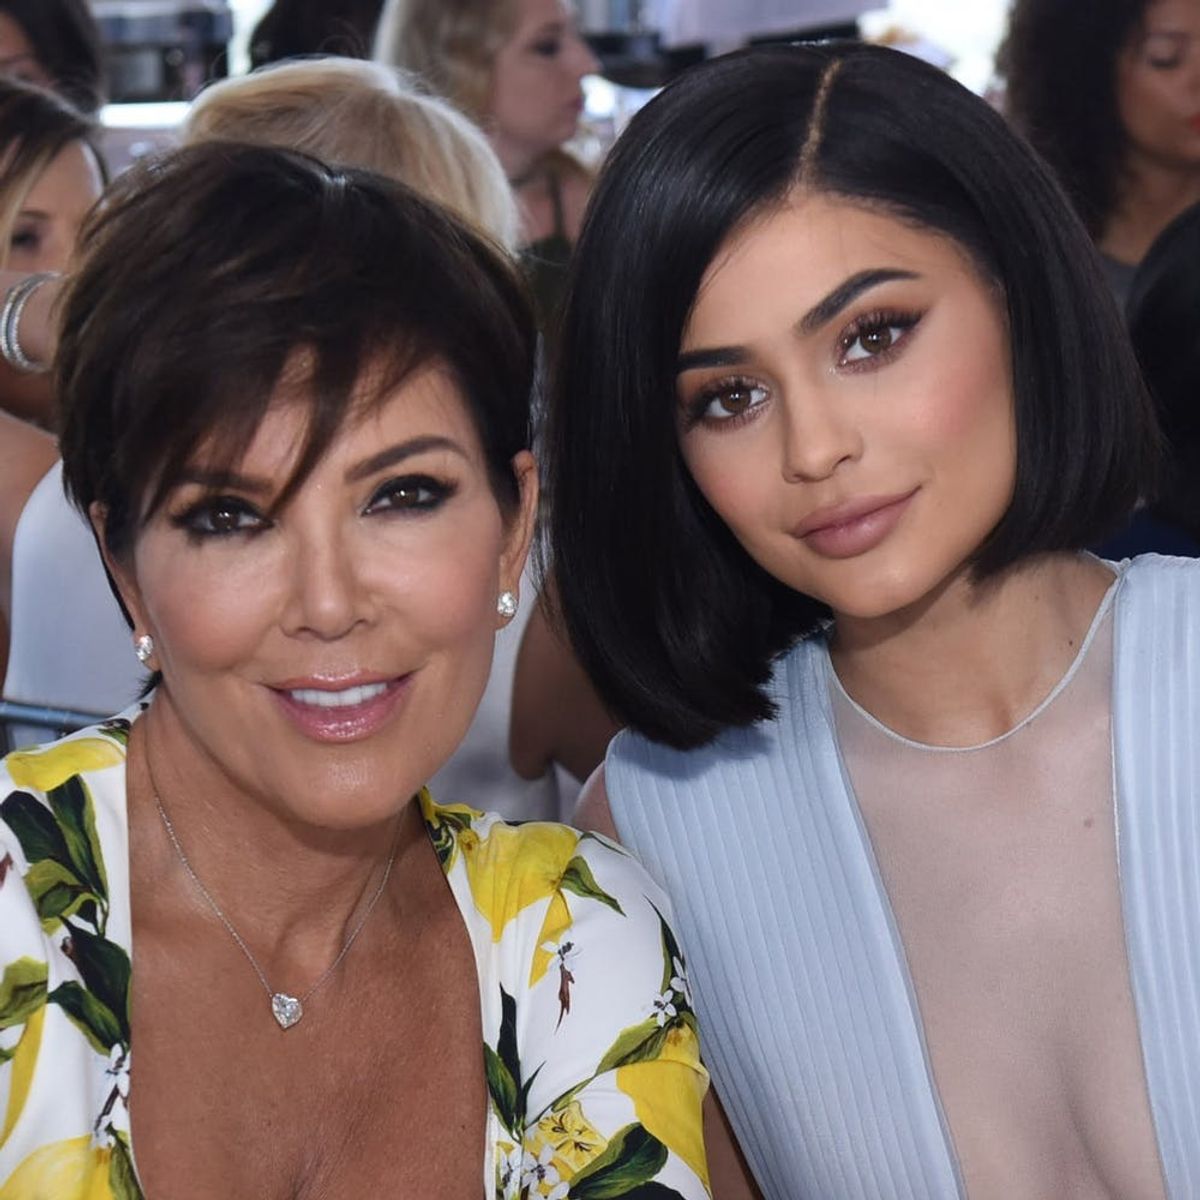 Kris Jenner Worries About Kylie After Breach of Privacy: ‘There’s Always Somebody Trying to Exploit’ Her